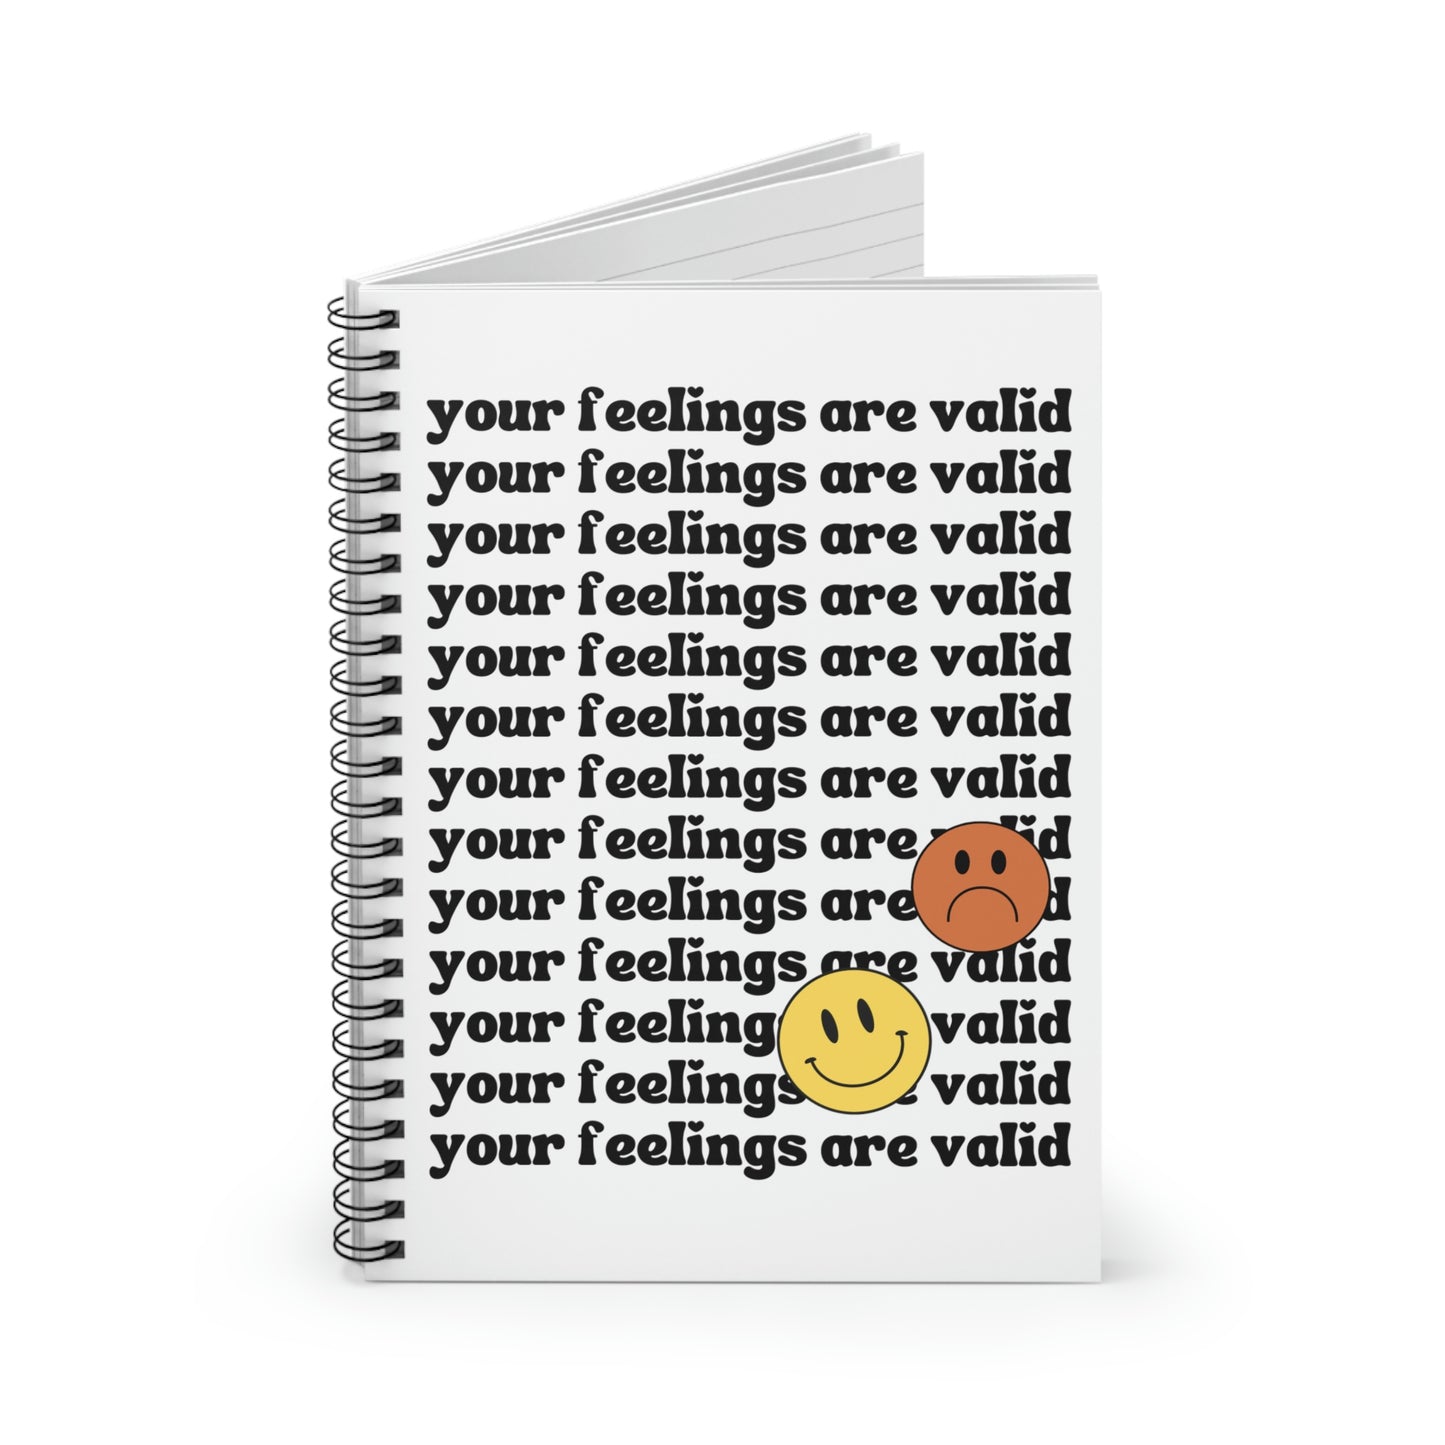 Your Feelings are Valid Spiral Notebook - Ruled Line